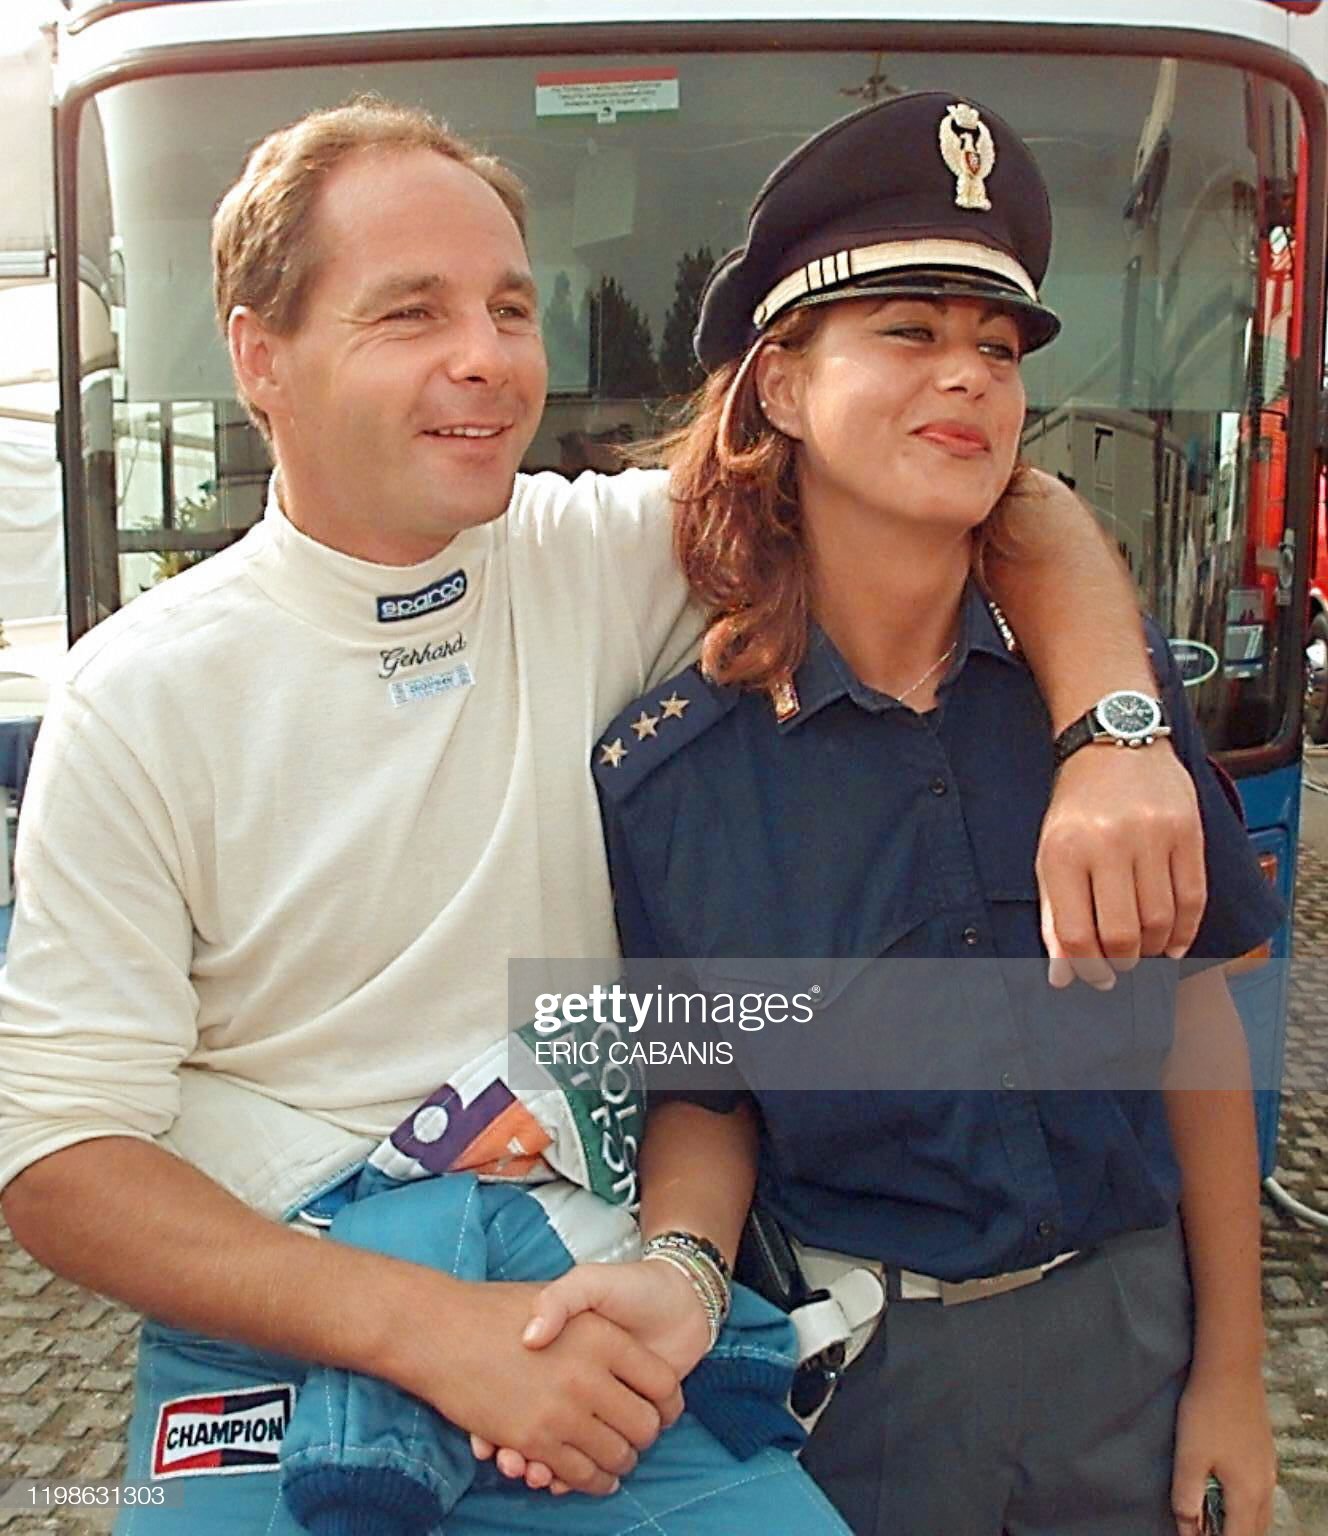 05 September 1997, Gerhard Berger jokes with an Italian policewoman. Photo by Getty Images.